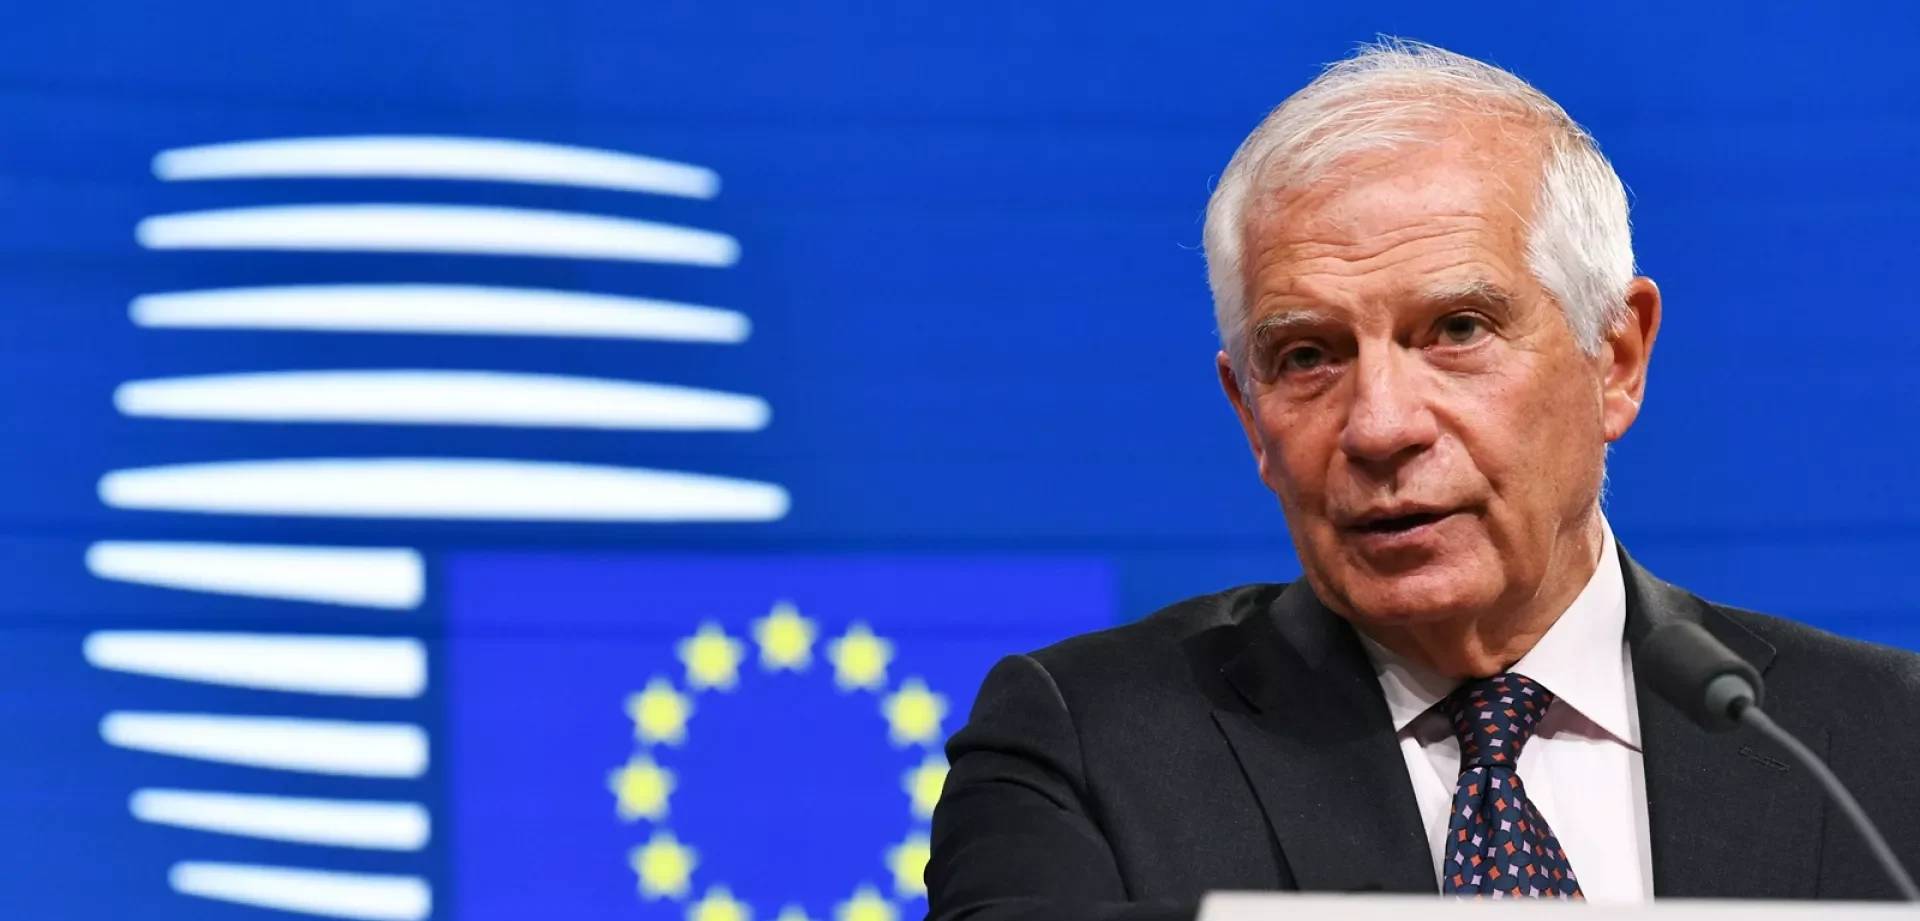 EU’s existence at stake in Ukraine, Borrell says